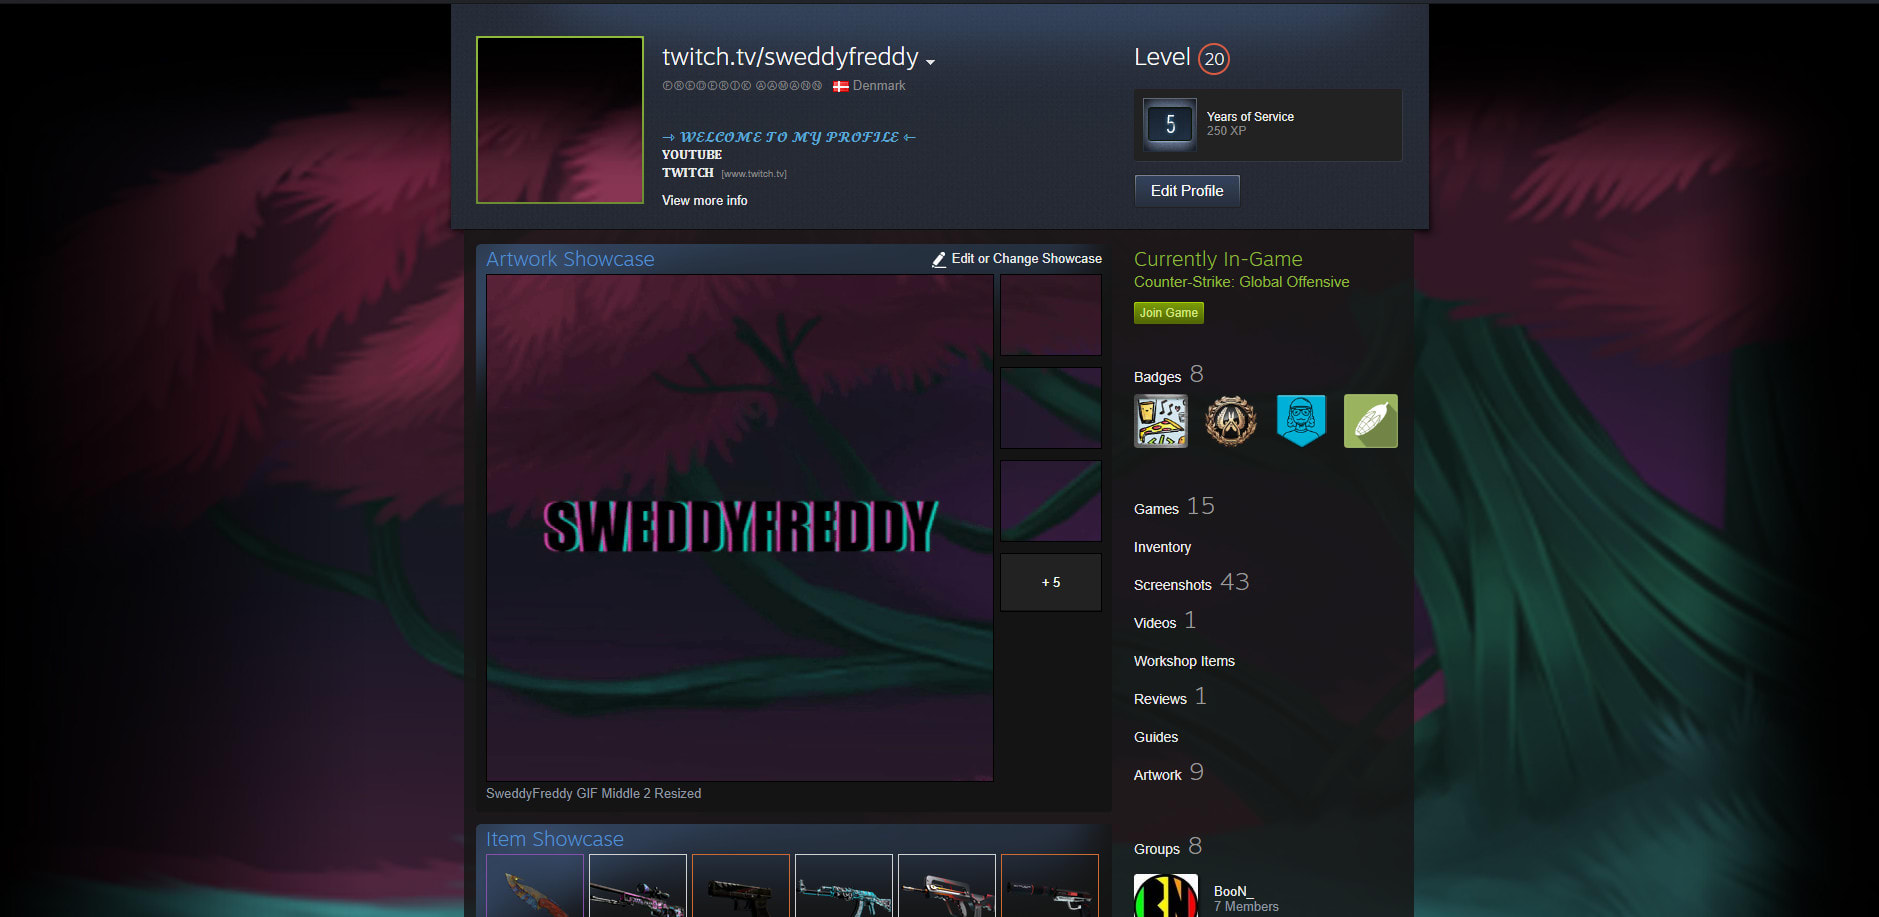 I'm pretty happy with the appearance of my Steam profile now